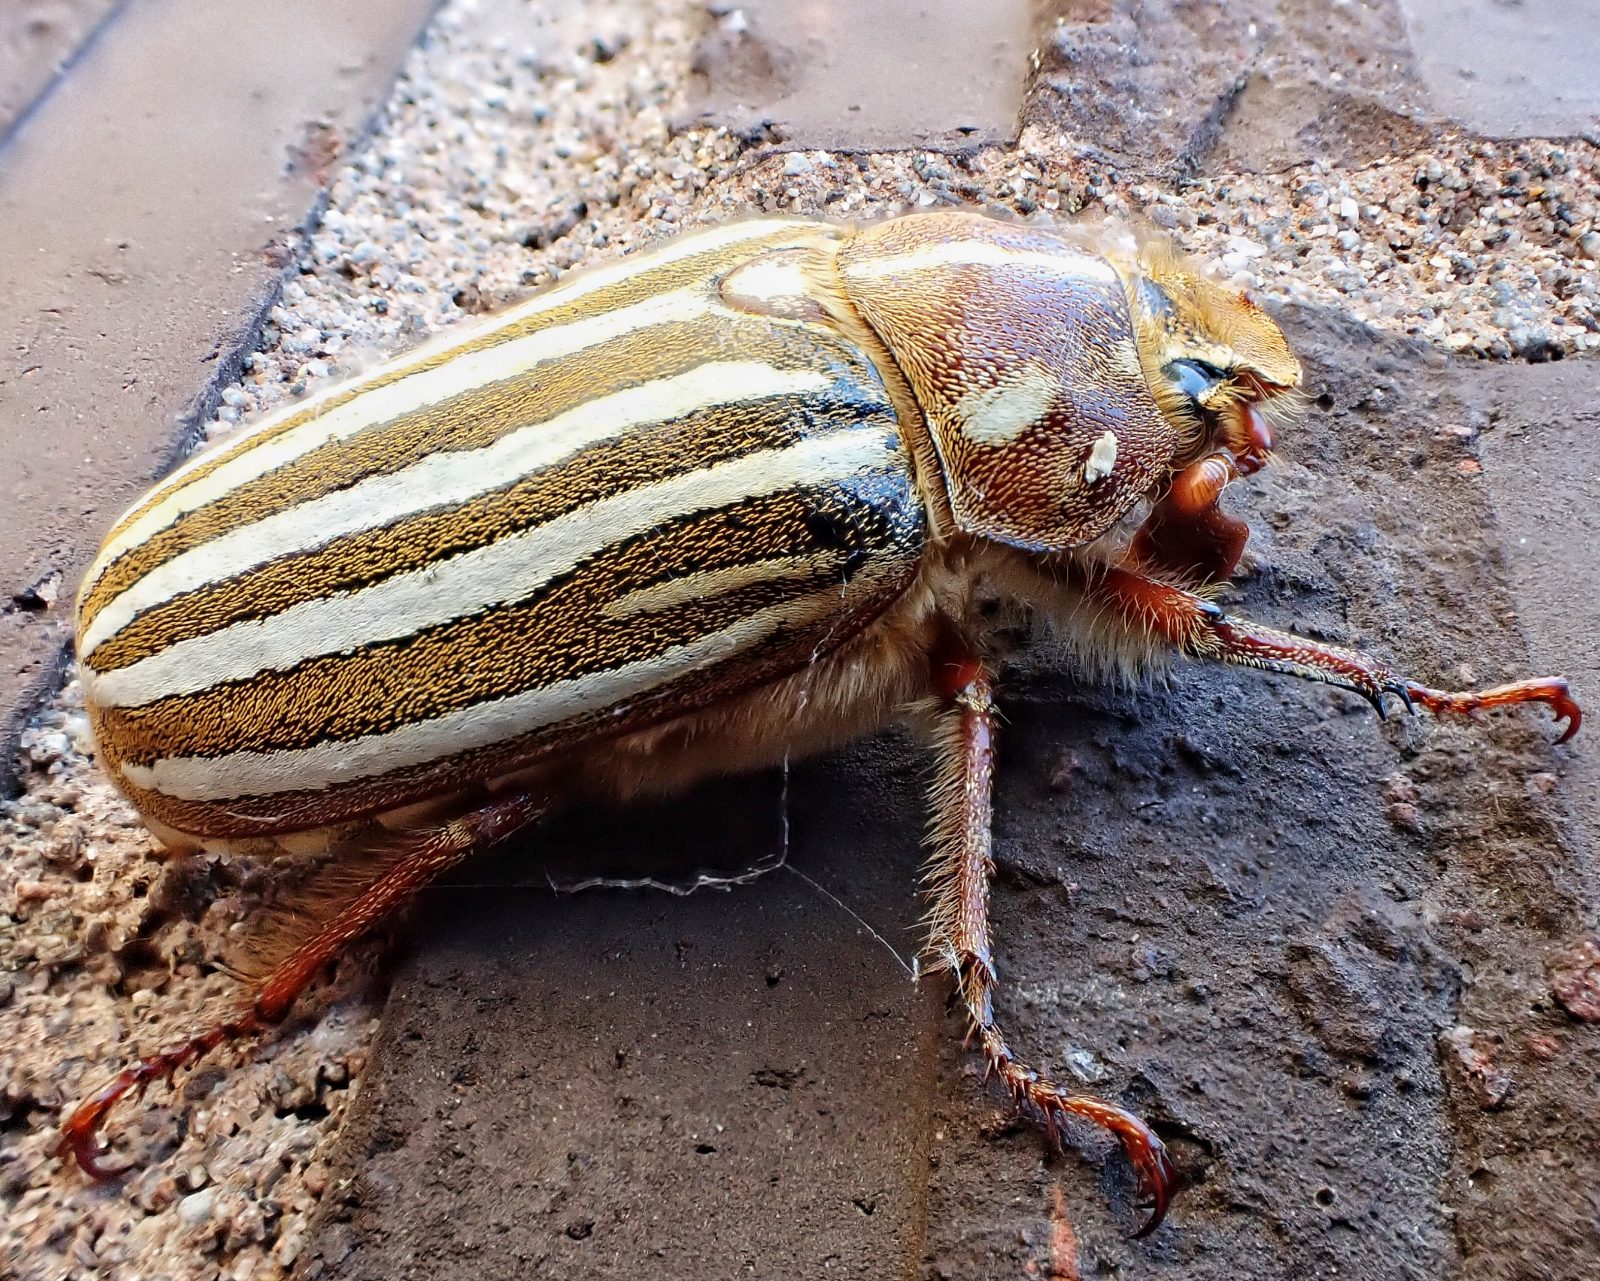 Polyphylla decemlineata (Tenlined June Beetle) 10,000 Things of the